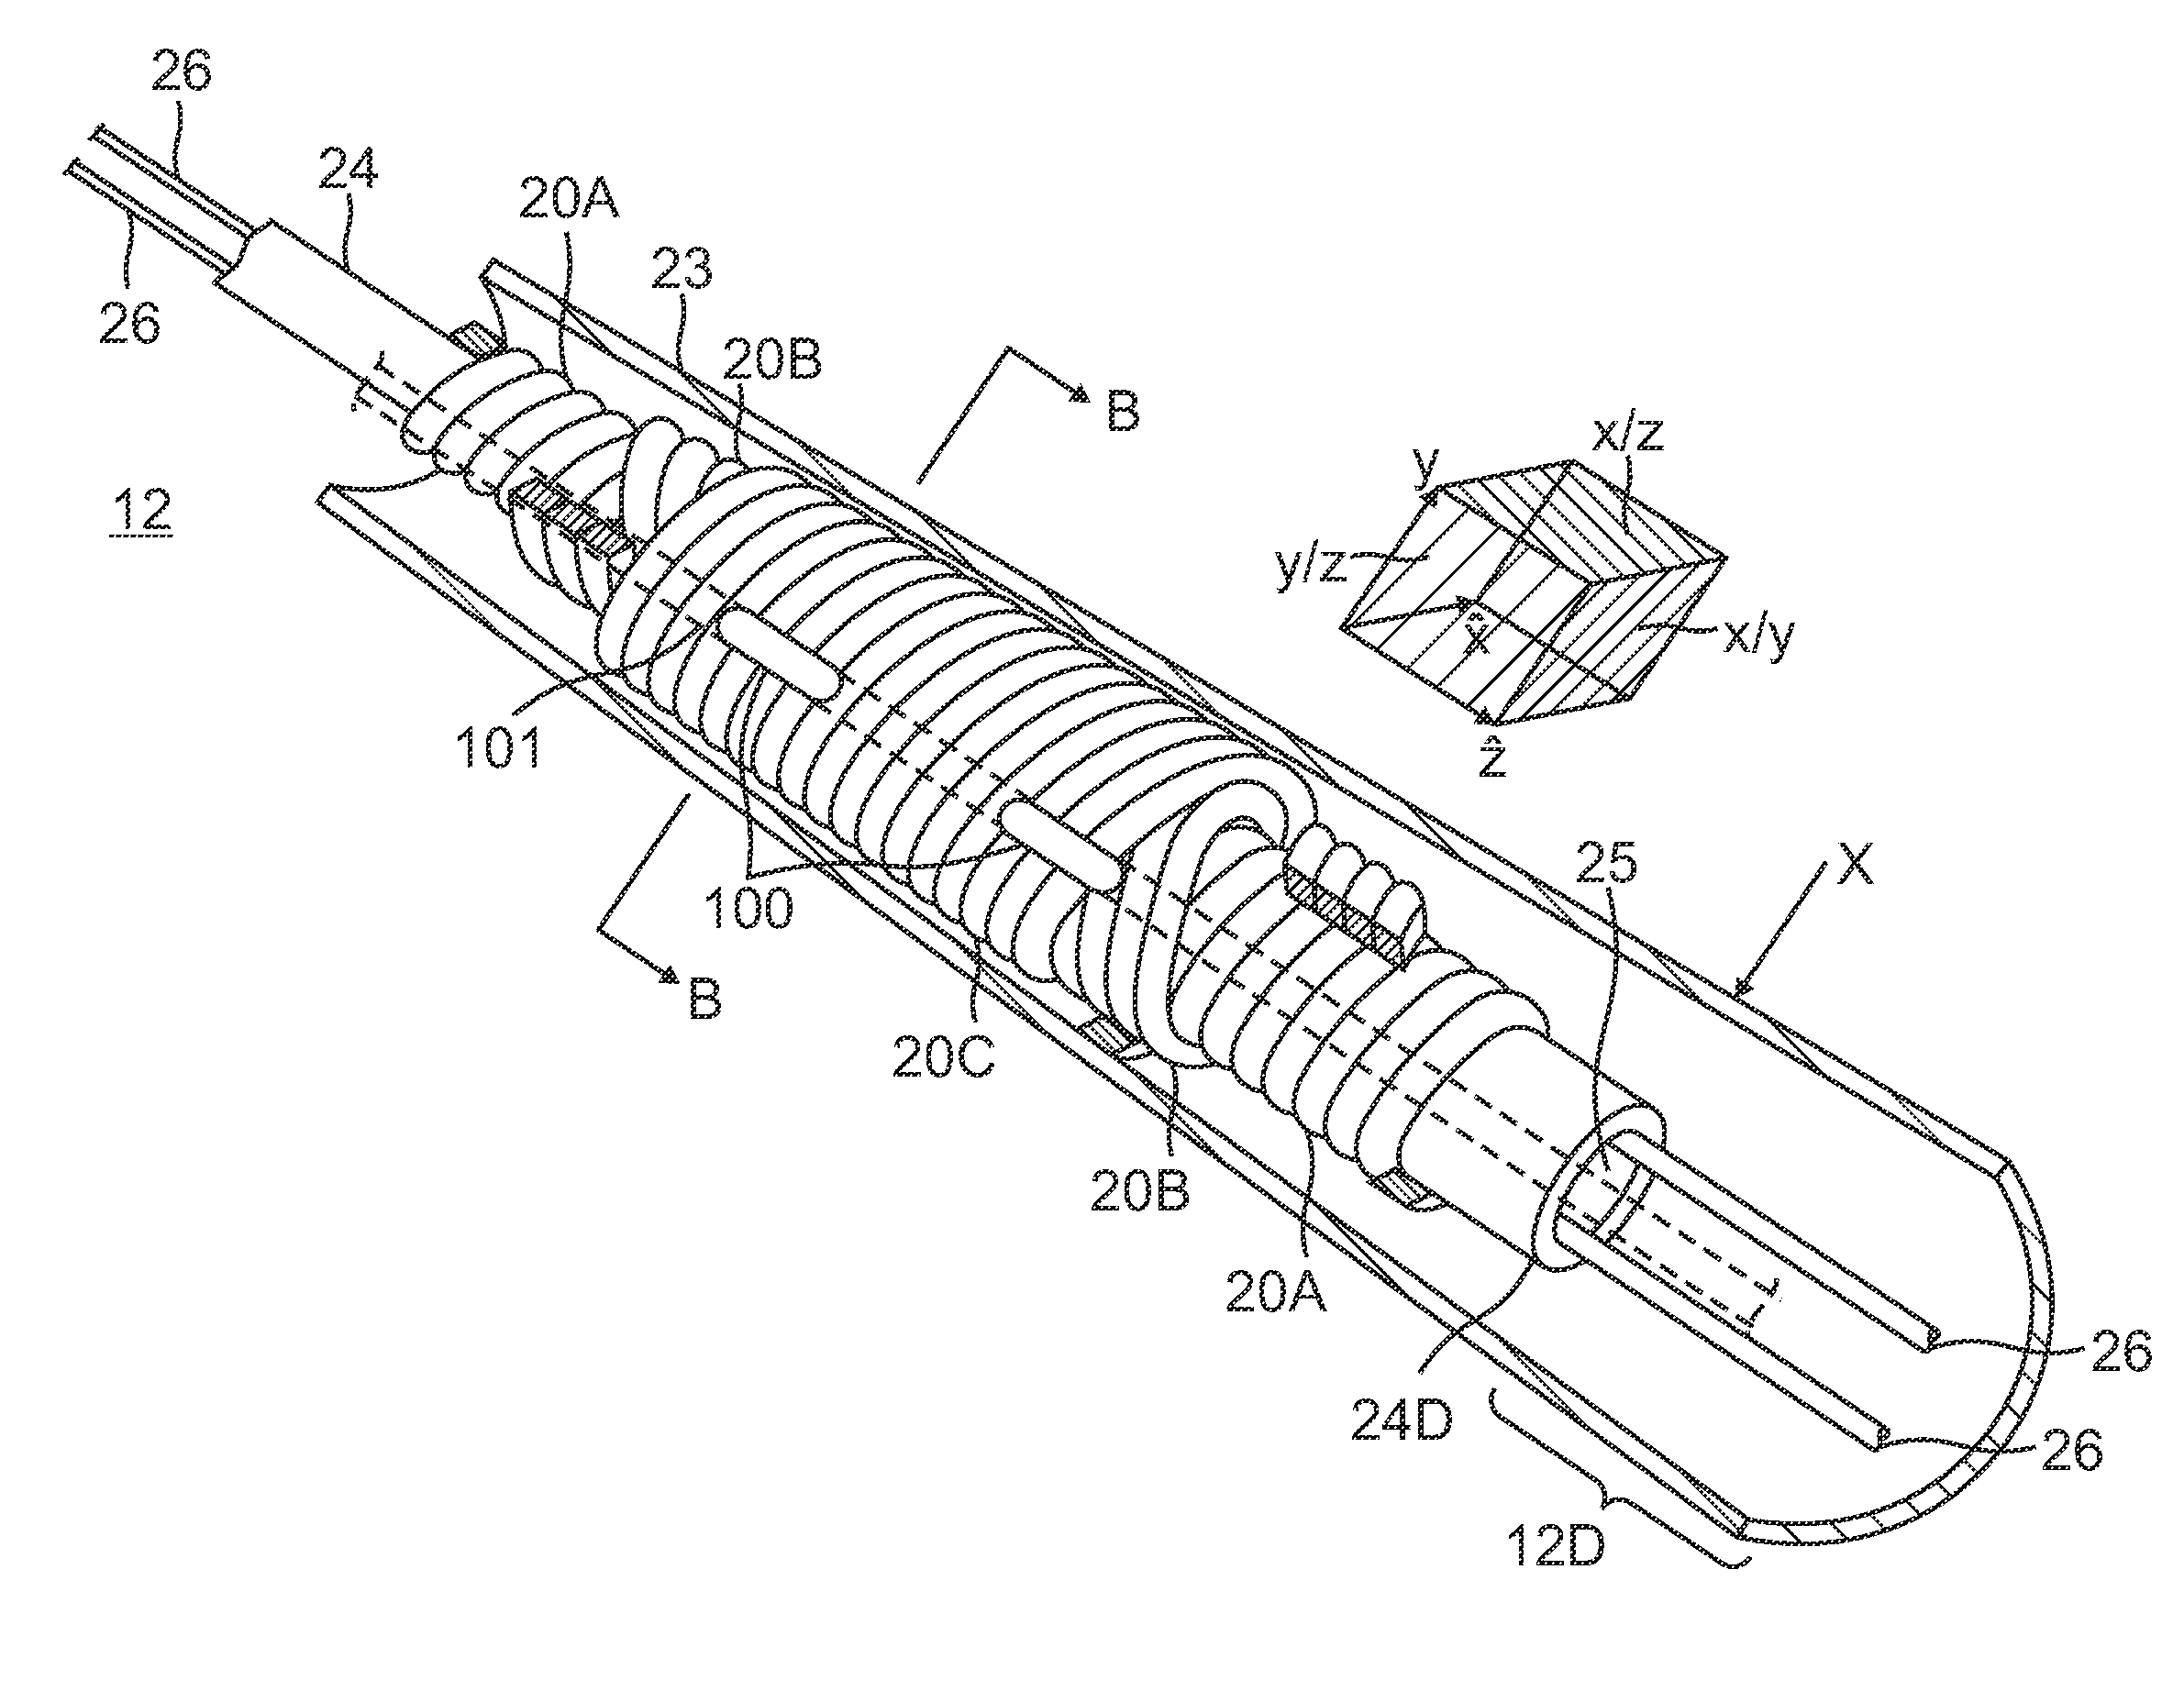 Catheter with adjustable deflection